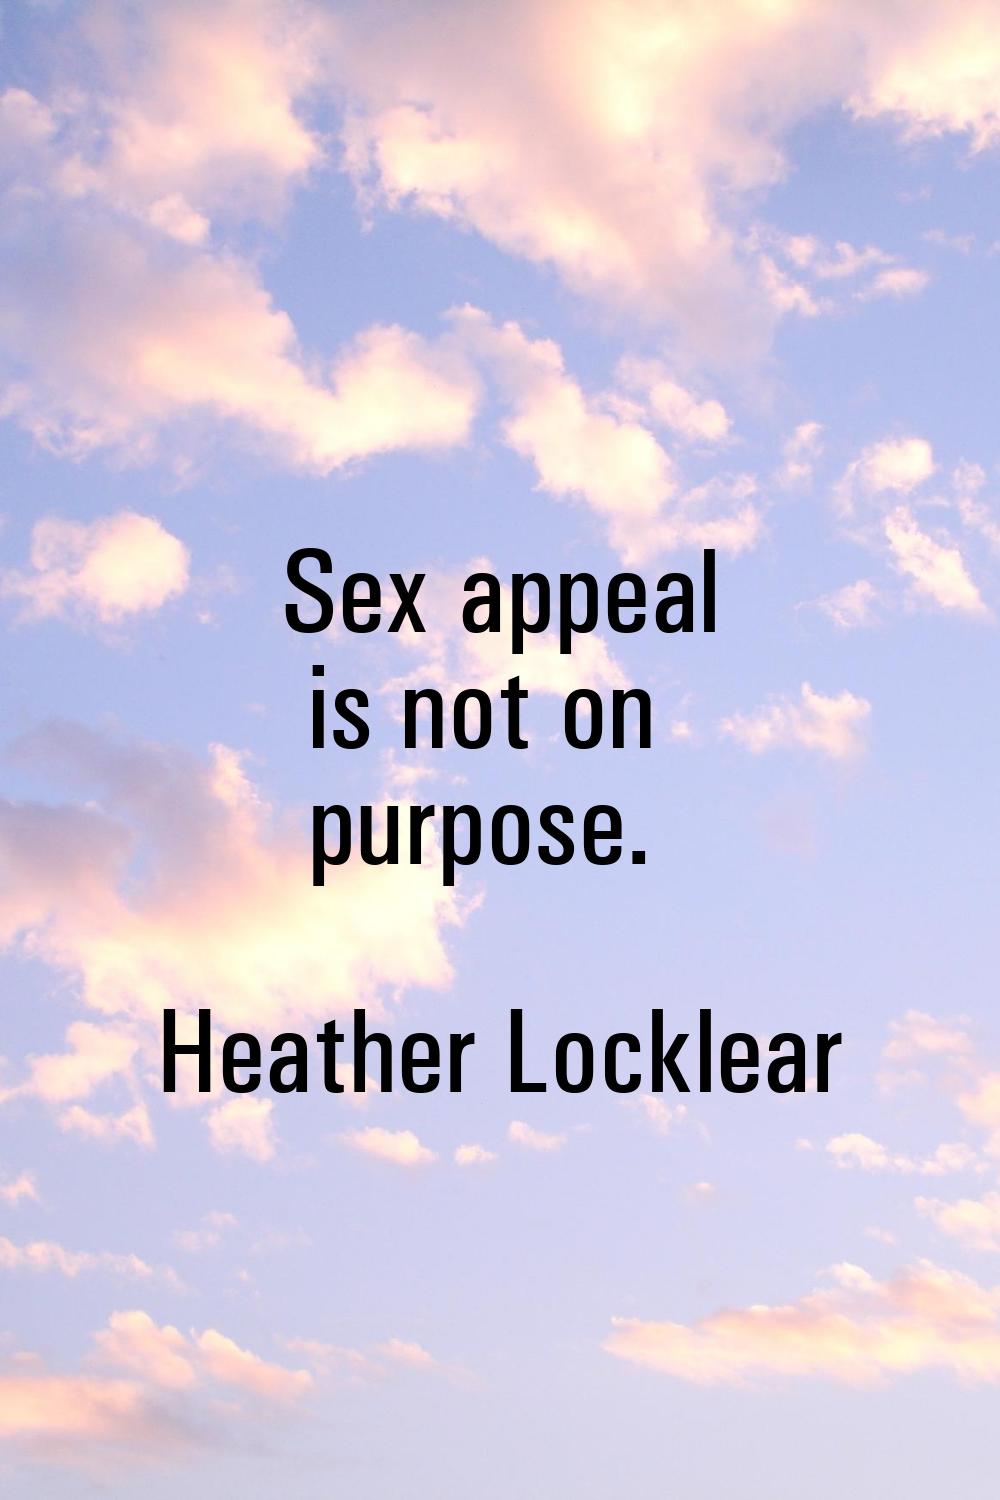 Sex appeal is not on purpose.